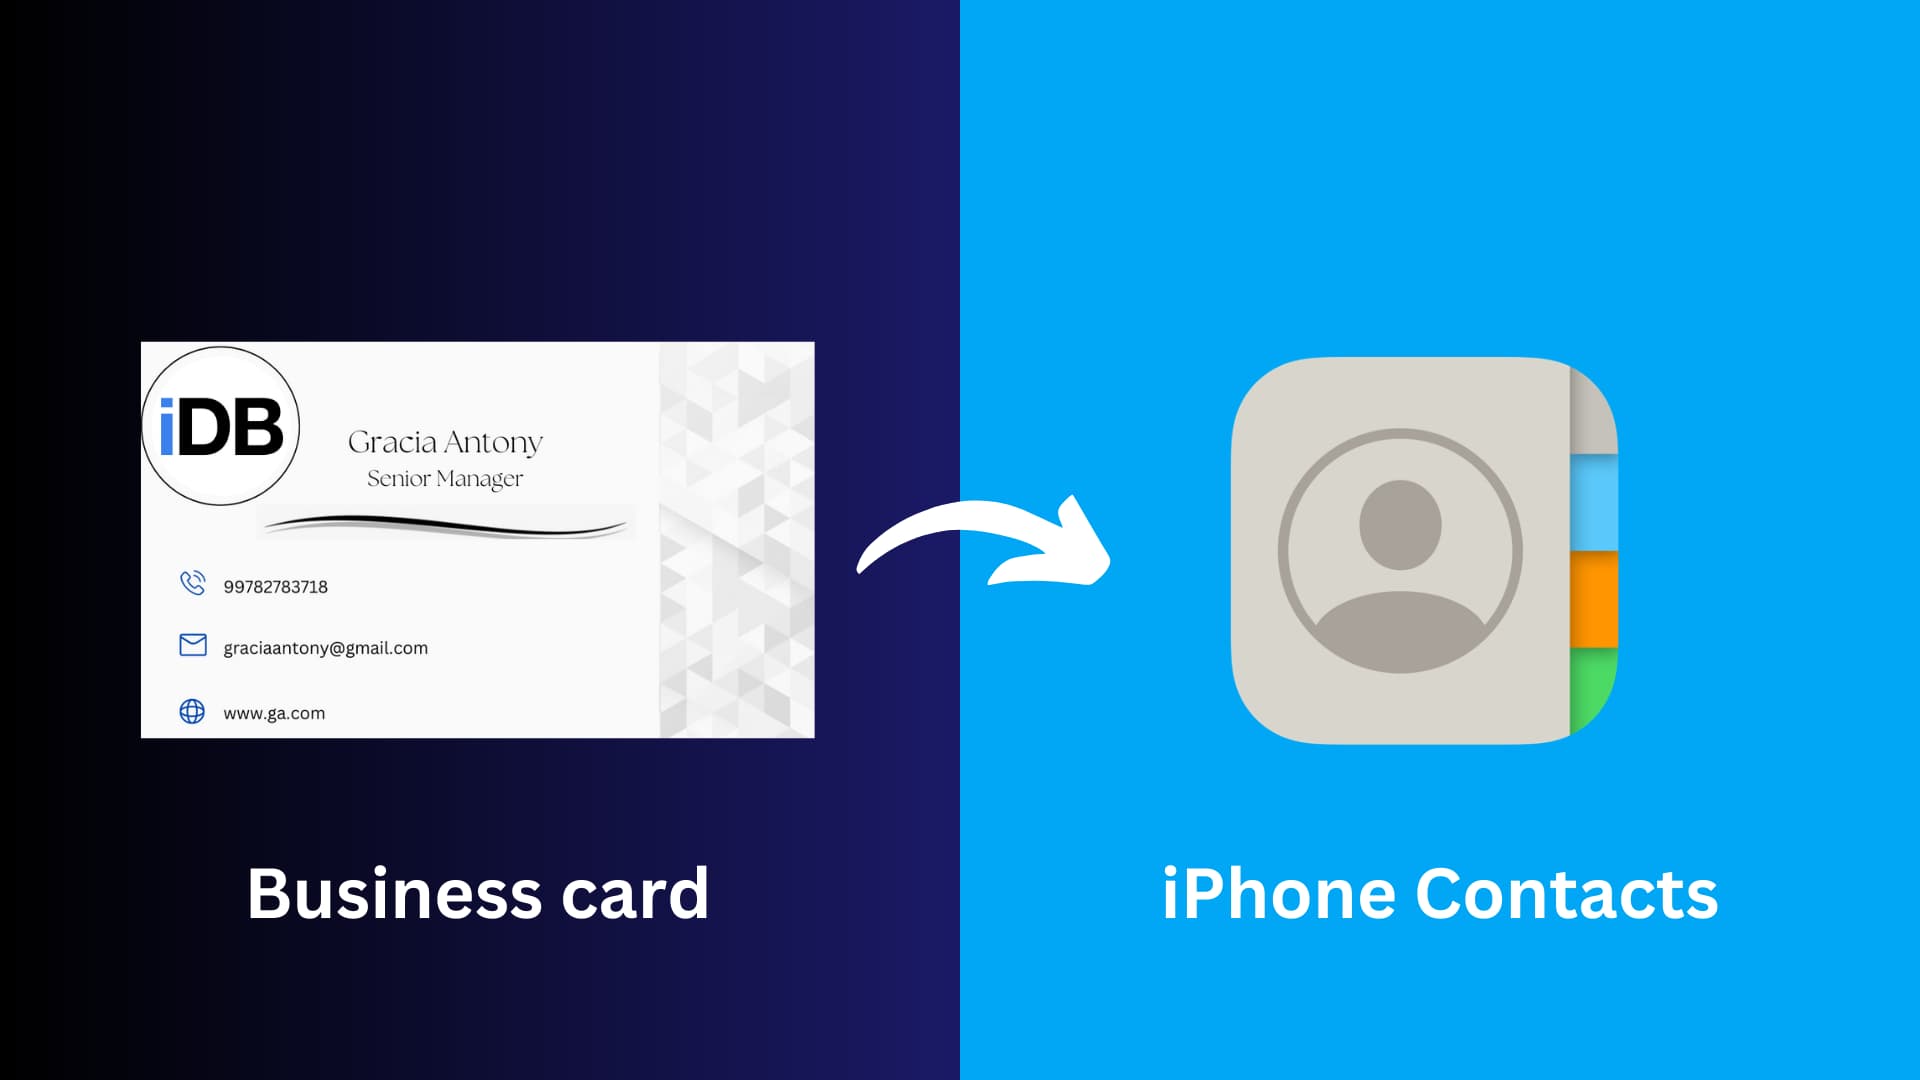 evernote business cards to contacts 4